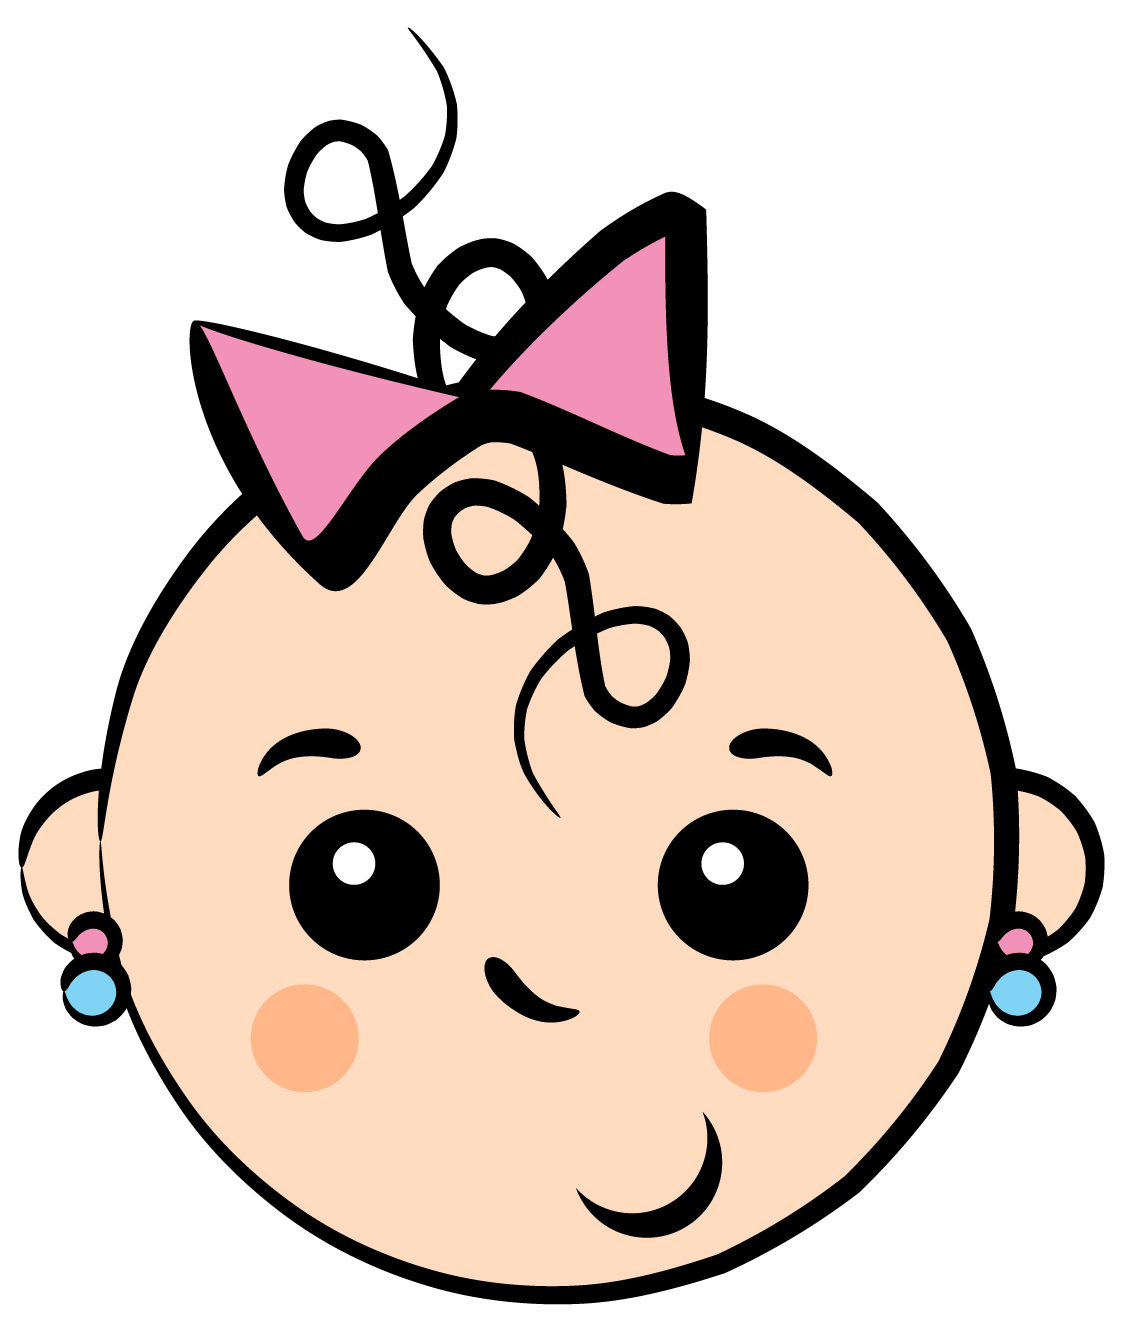 free clipart baby shower girl - photo #27